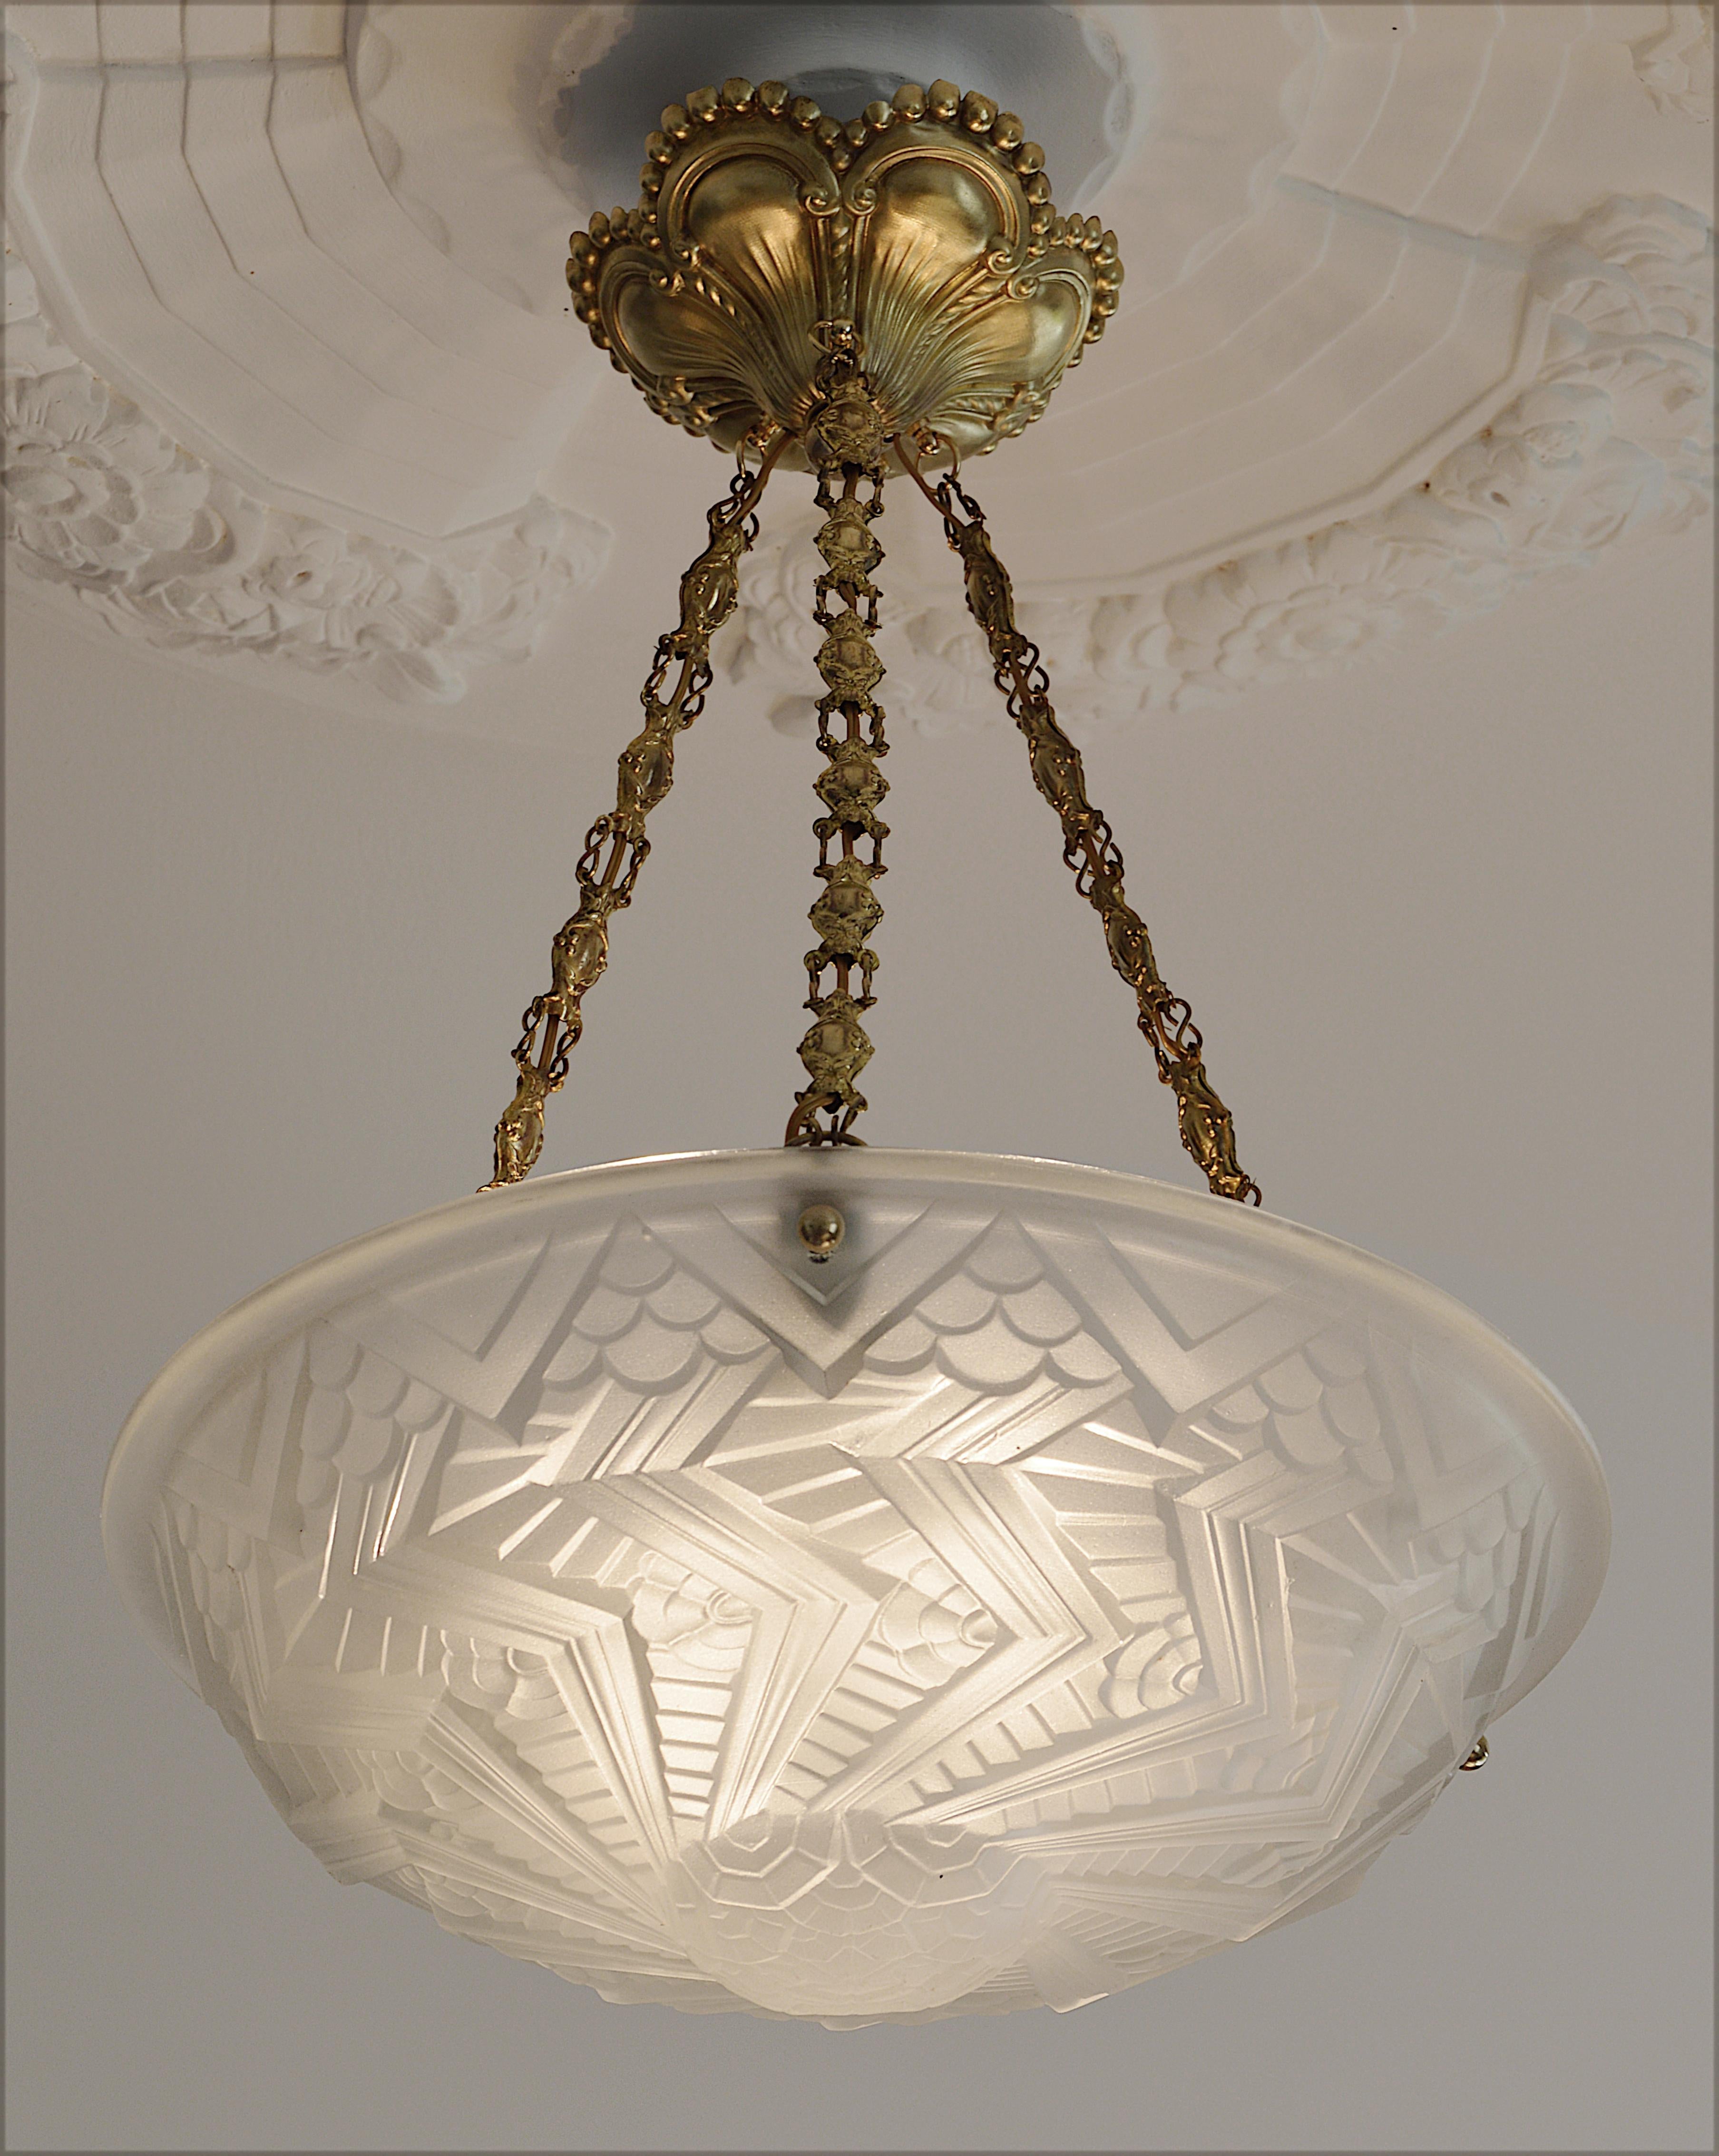 French Art Deco chandelier by Charles Schneider, Epinay-sur-Seine (Paris), France, circa 1925. Molded glass shade with a stylized geometric pattern and sharp edges that comes hung at its original stamped brass fixture. A great work by Schneider